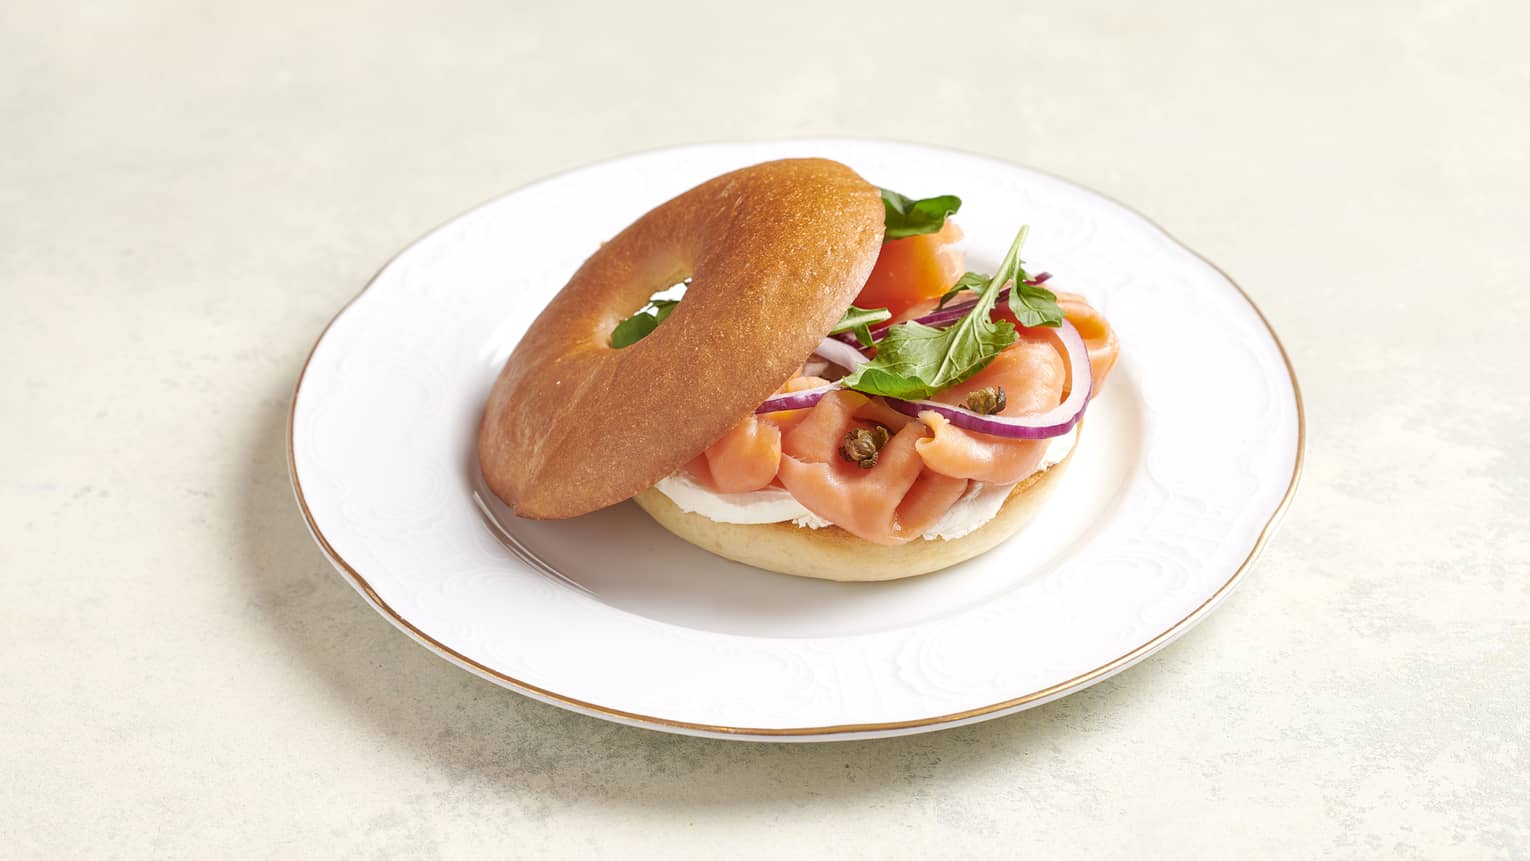 Lox Bagel with Capers, Red Onion, Cream Cheese